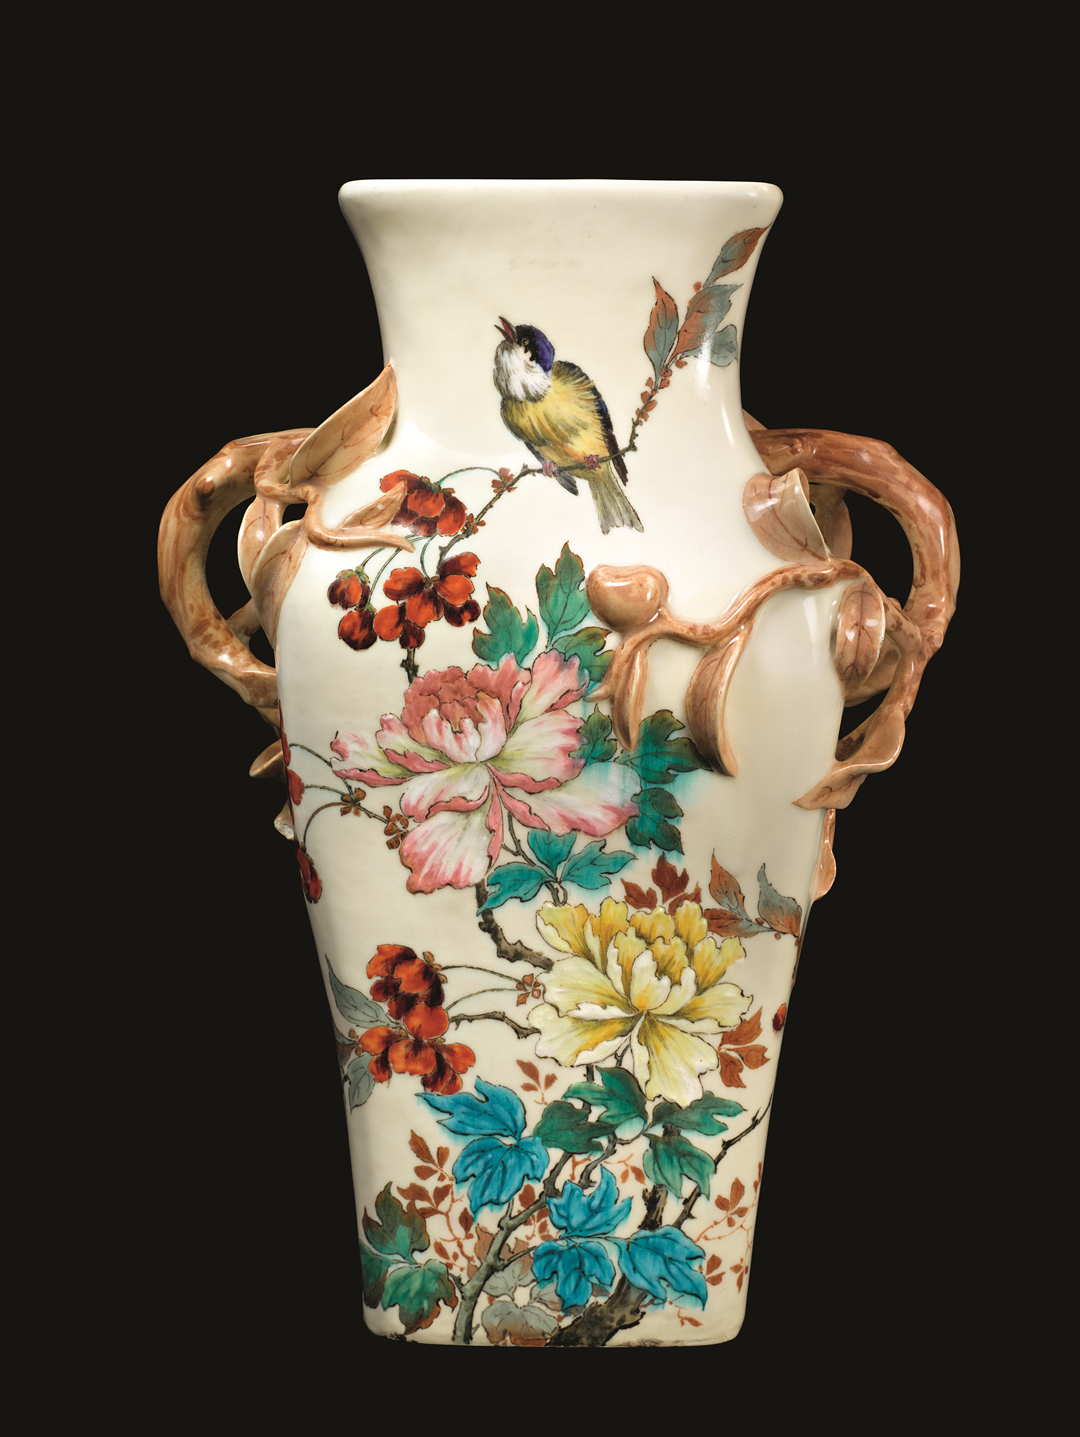 Théodore Deck, ca. 1870–90, earthenware, 19 x 14 x 10 in. (48.3 x 35.6 x 25.4 cm); from ‘Vases’ chapter.  Photo by Maggie Nimkin assisted by Erica Martone